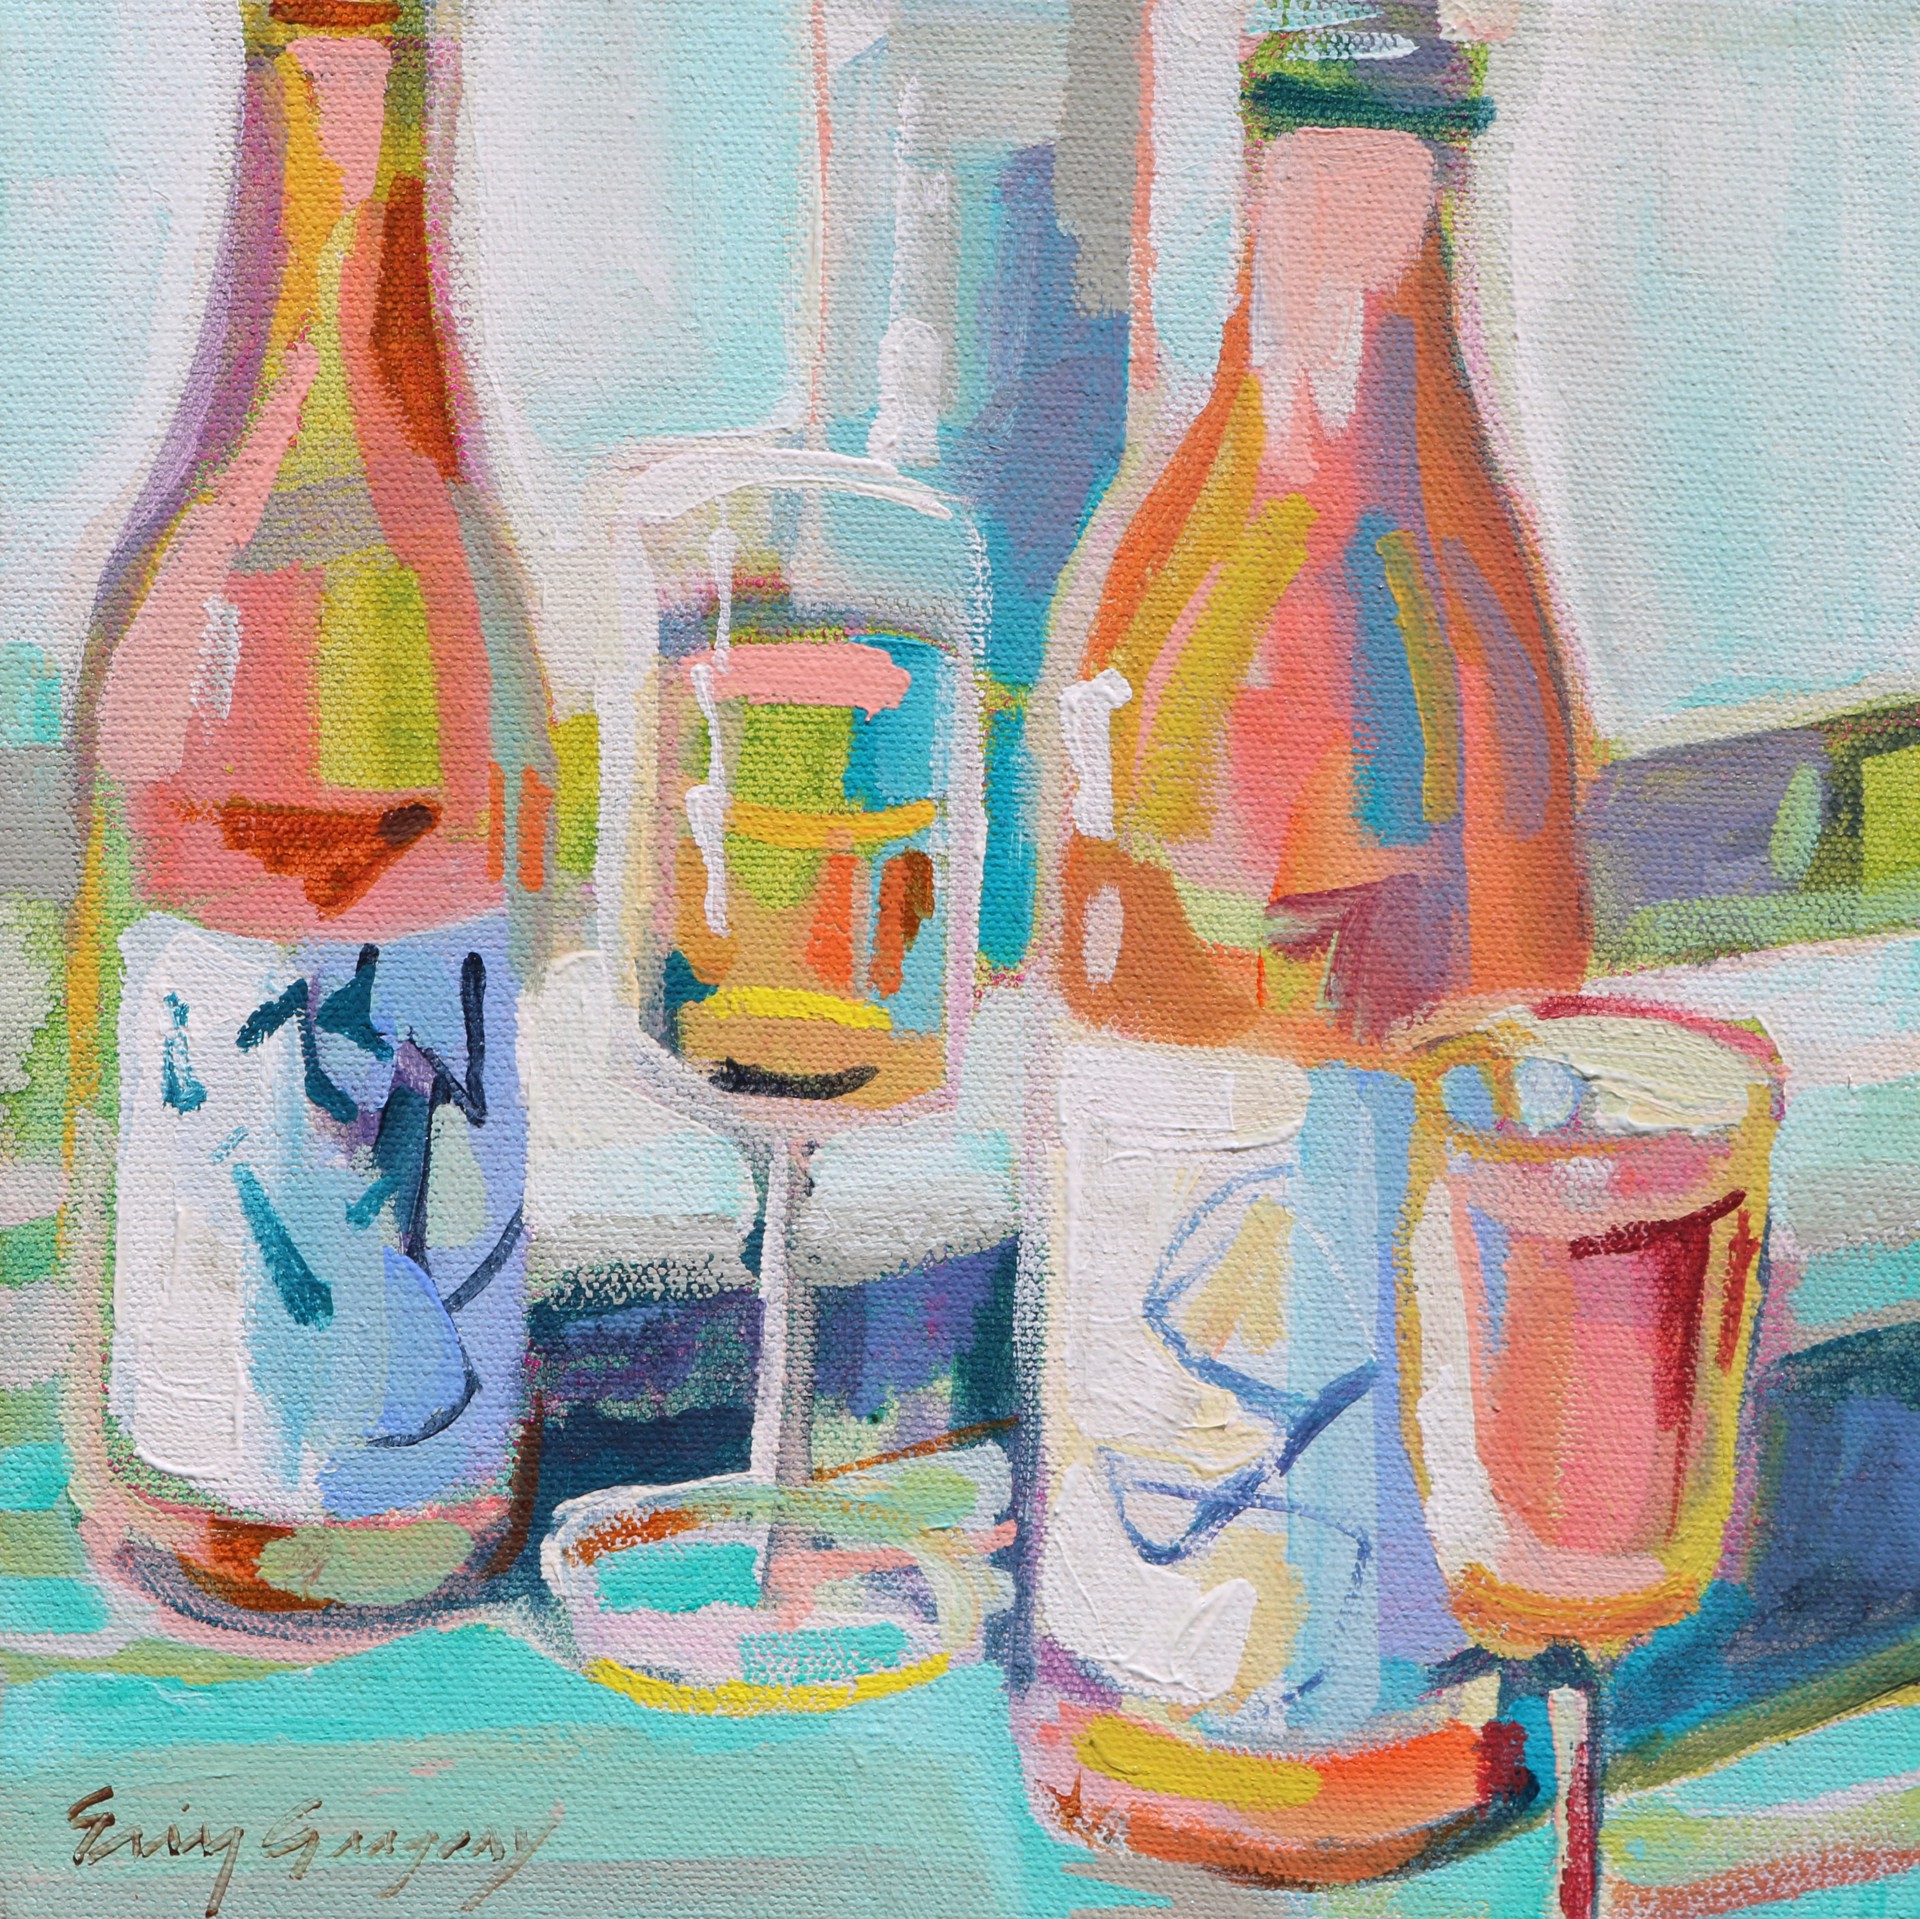 Let's Celebrate! 10 {SOLD} by Erin Gregory